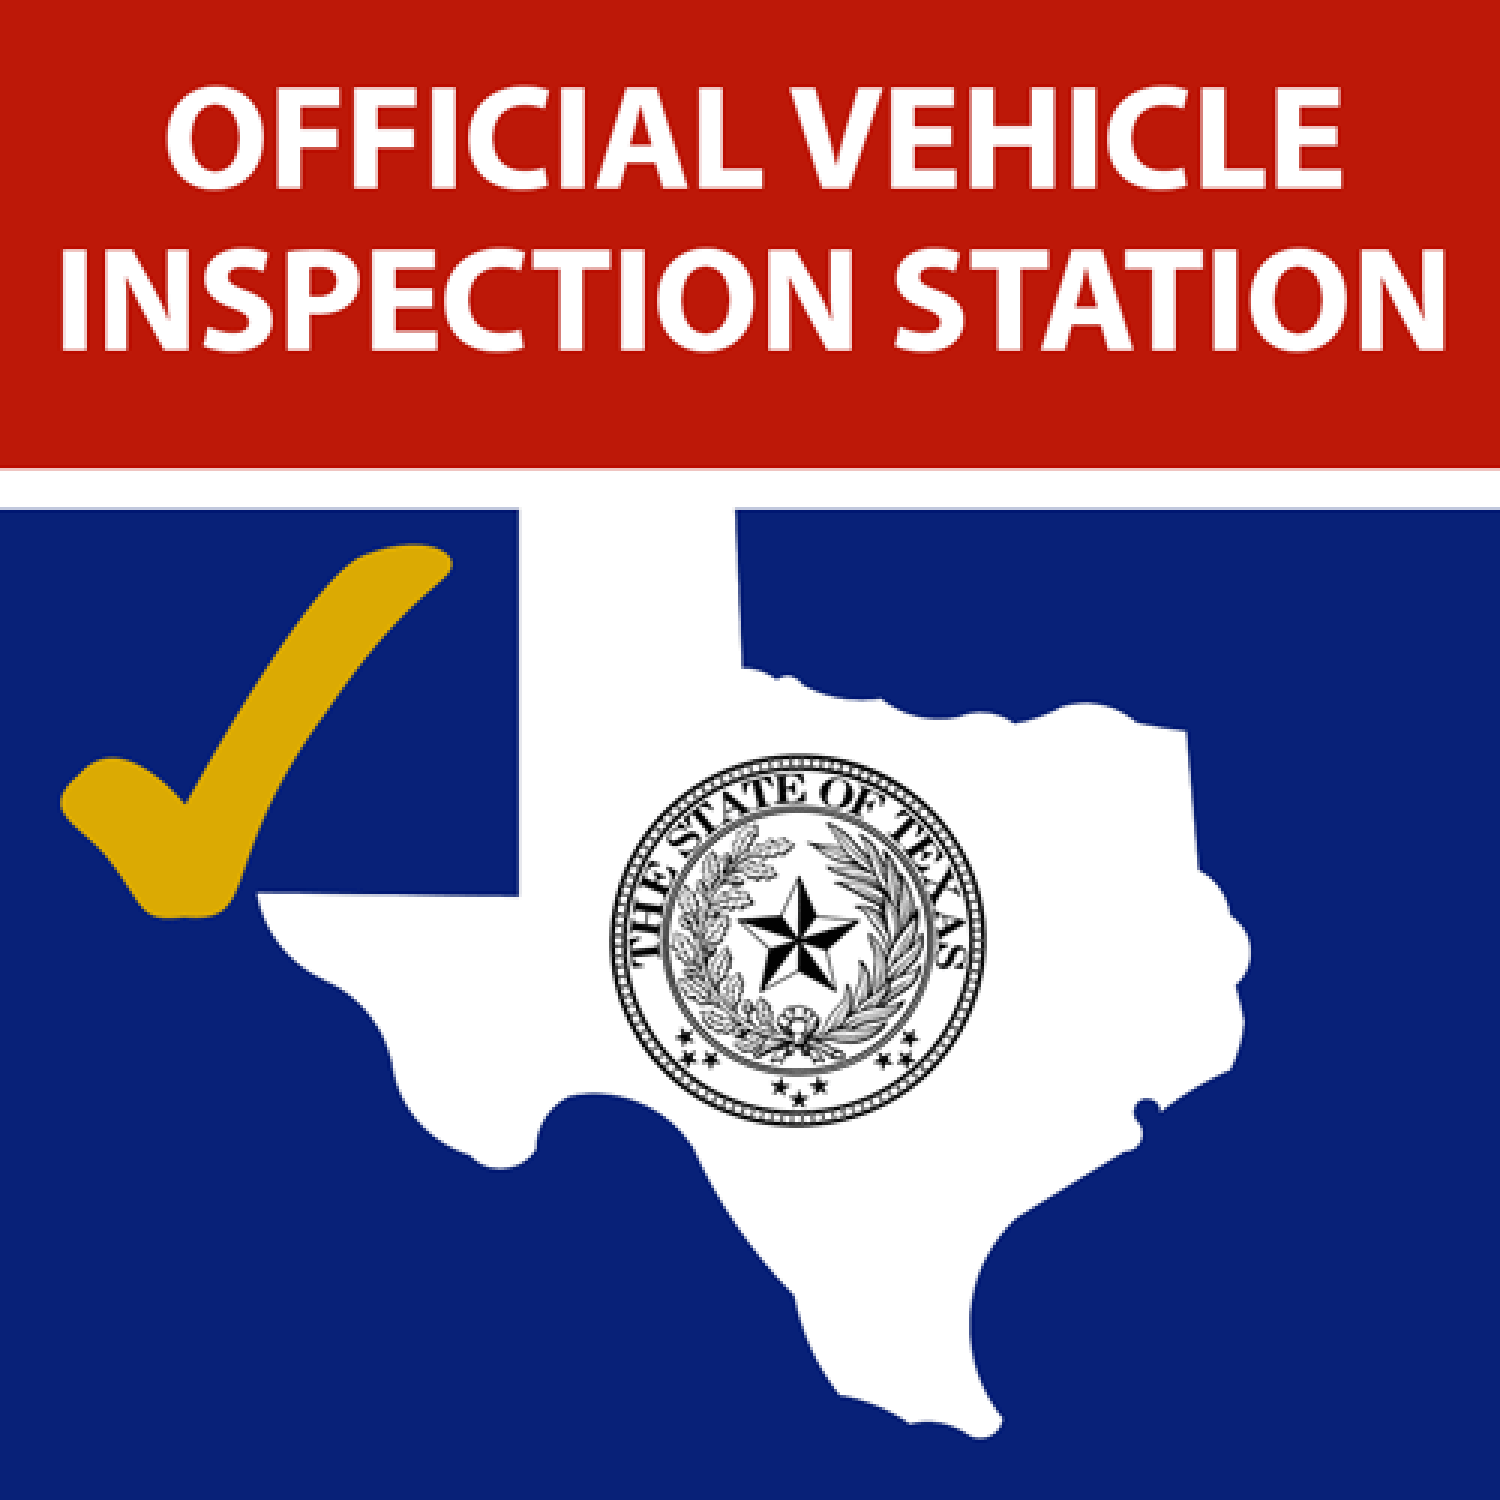 Texas State Inspection Station logo